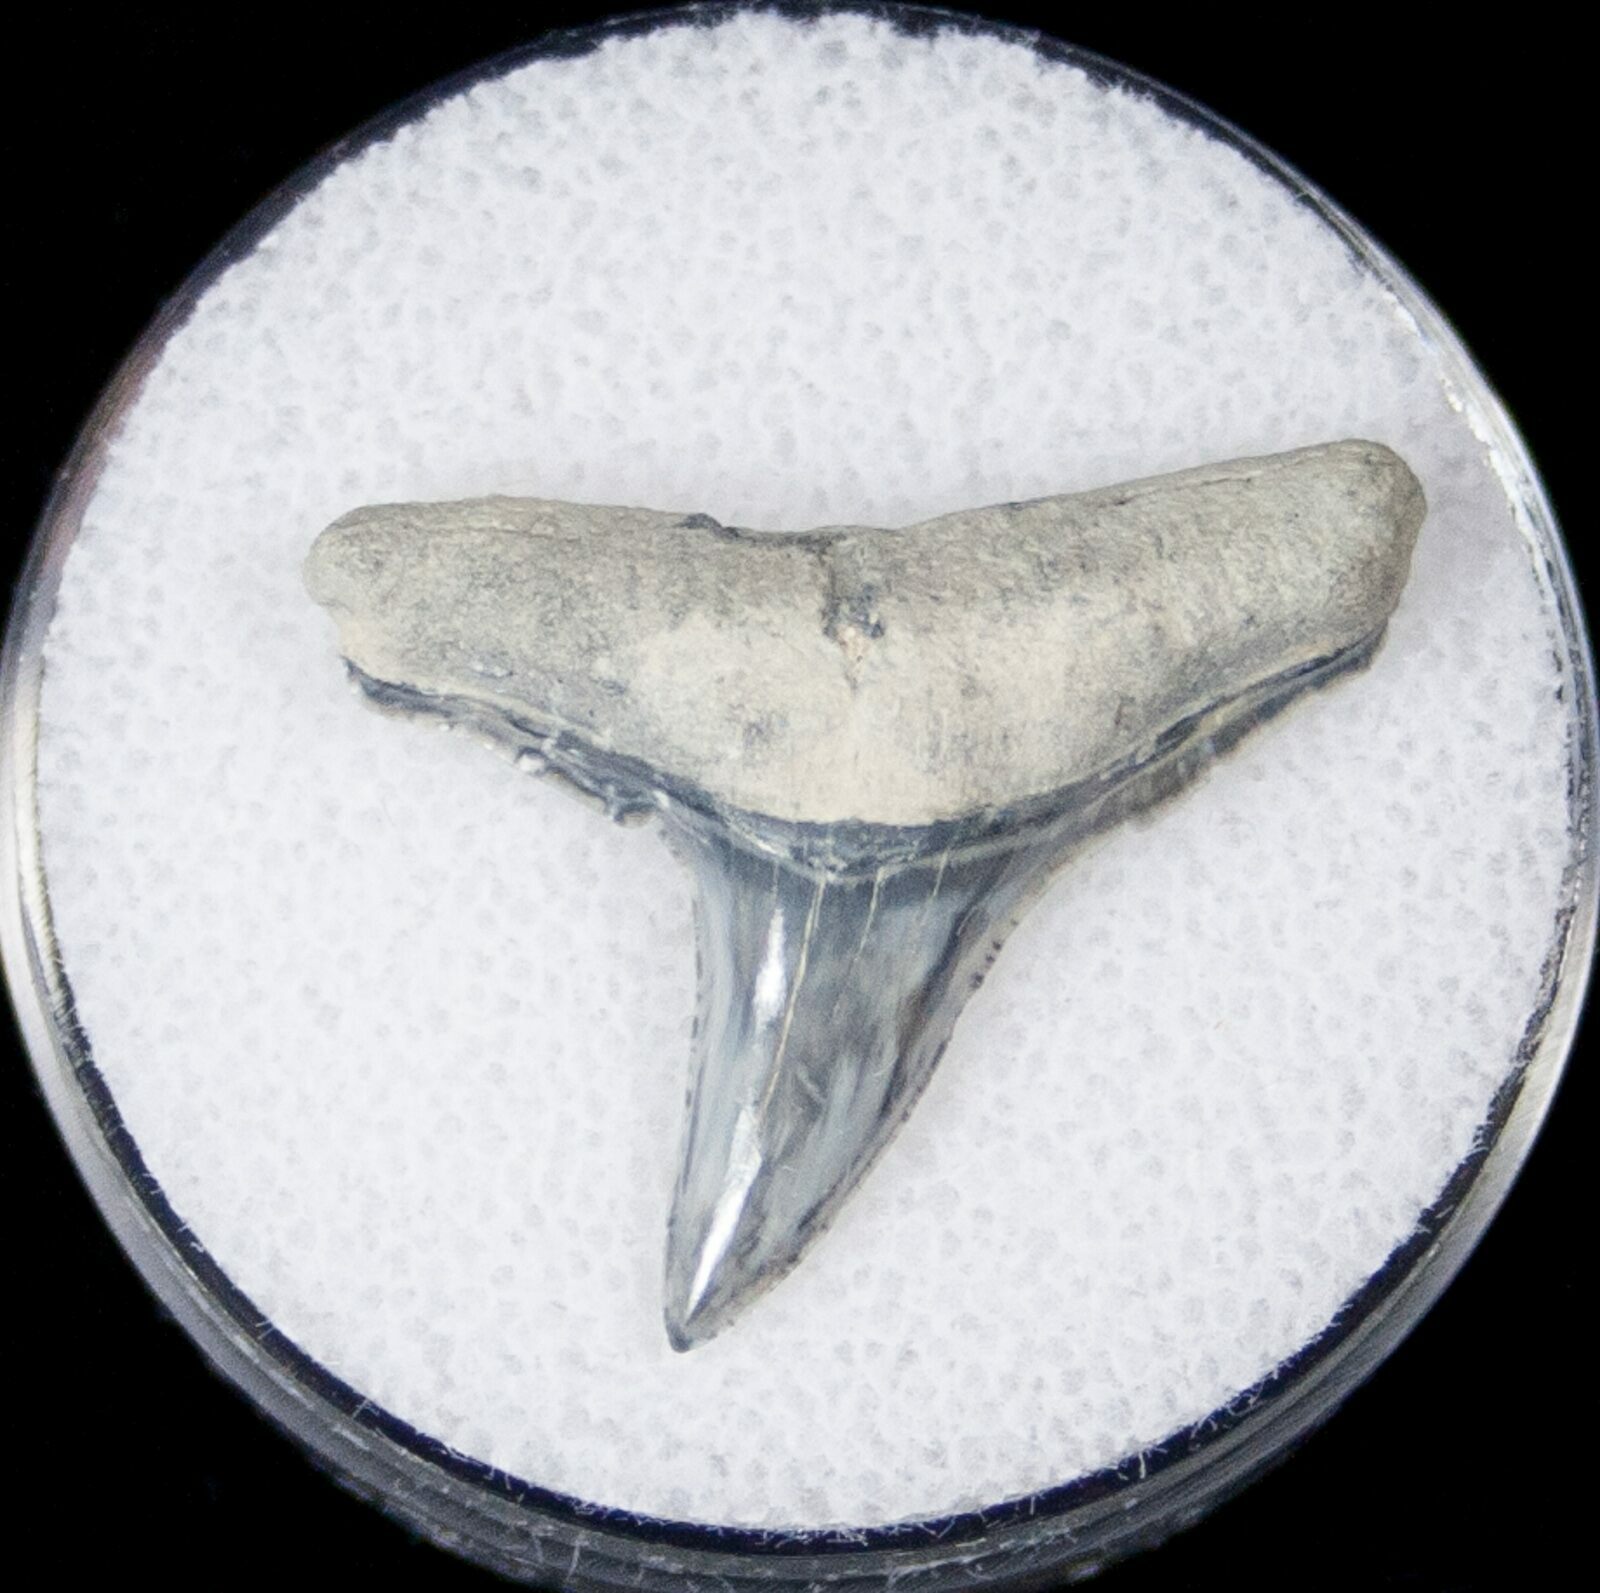 Large Fossil Lemon Shark Tooth - Bone Valley For Sale (#14693